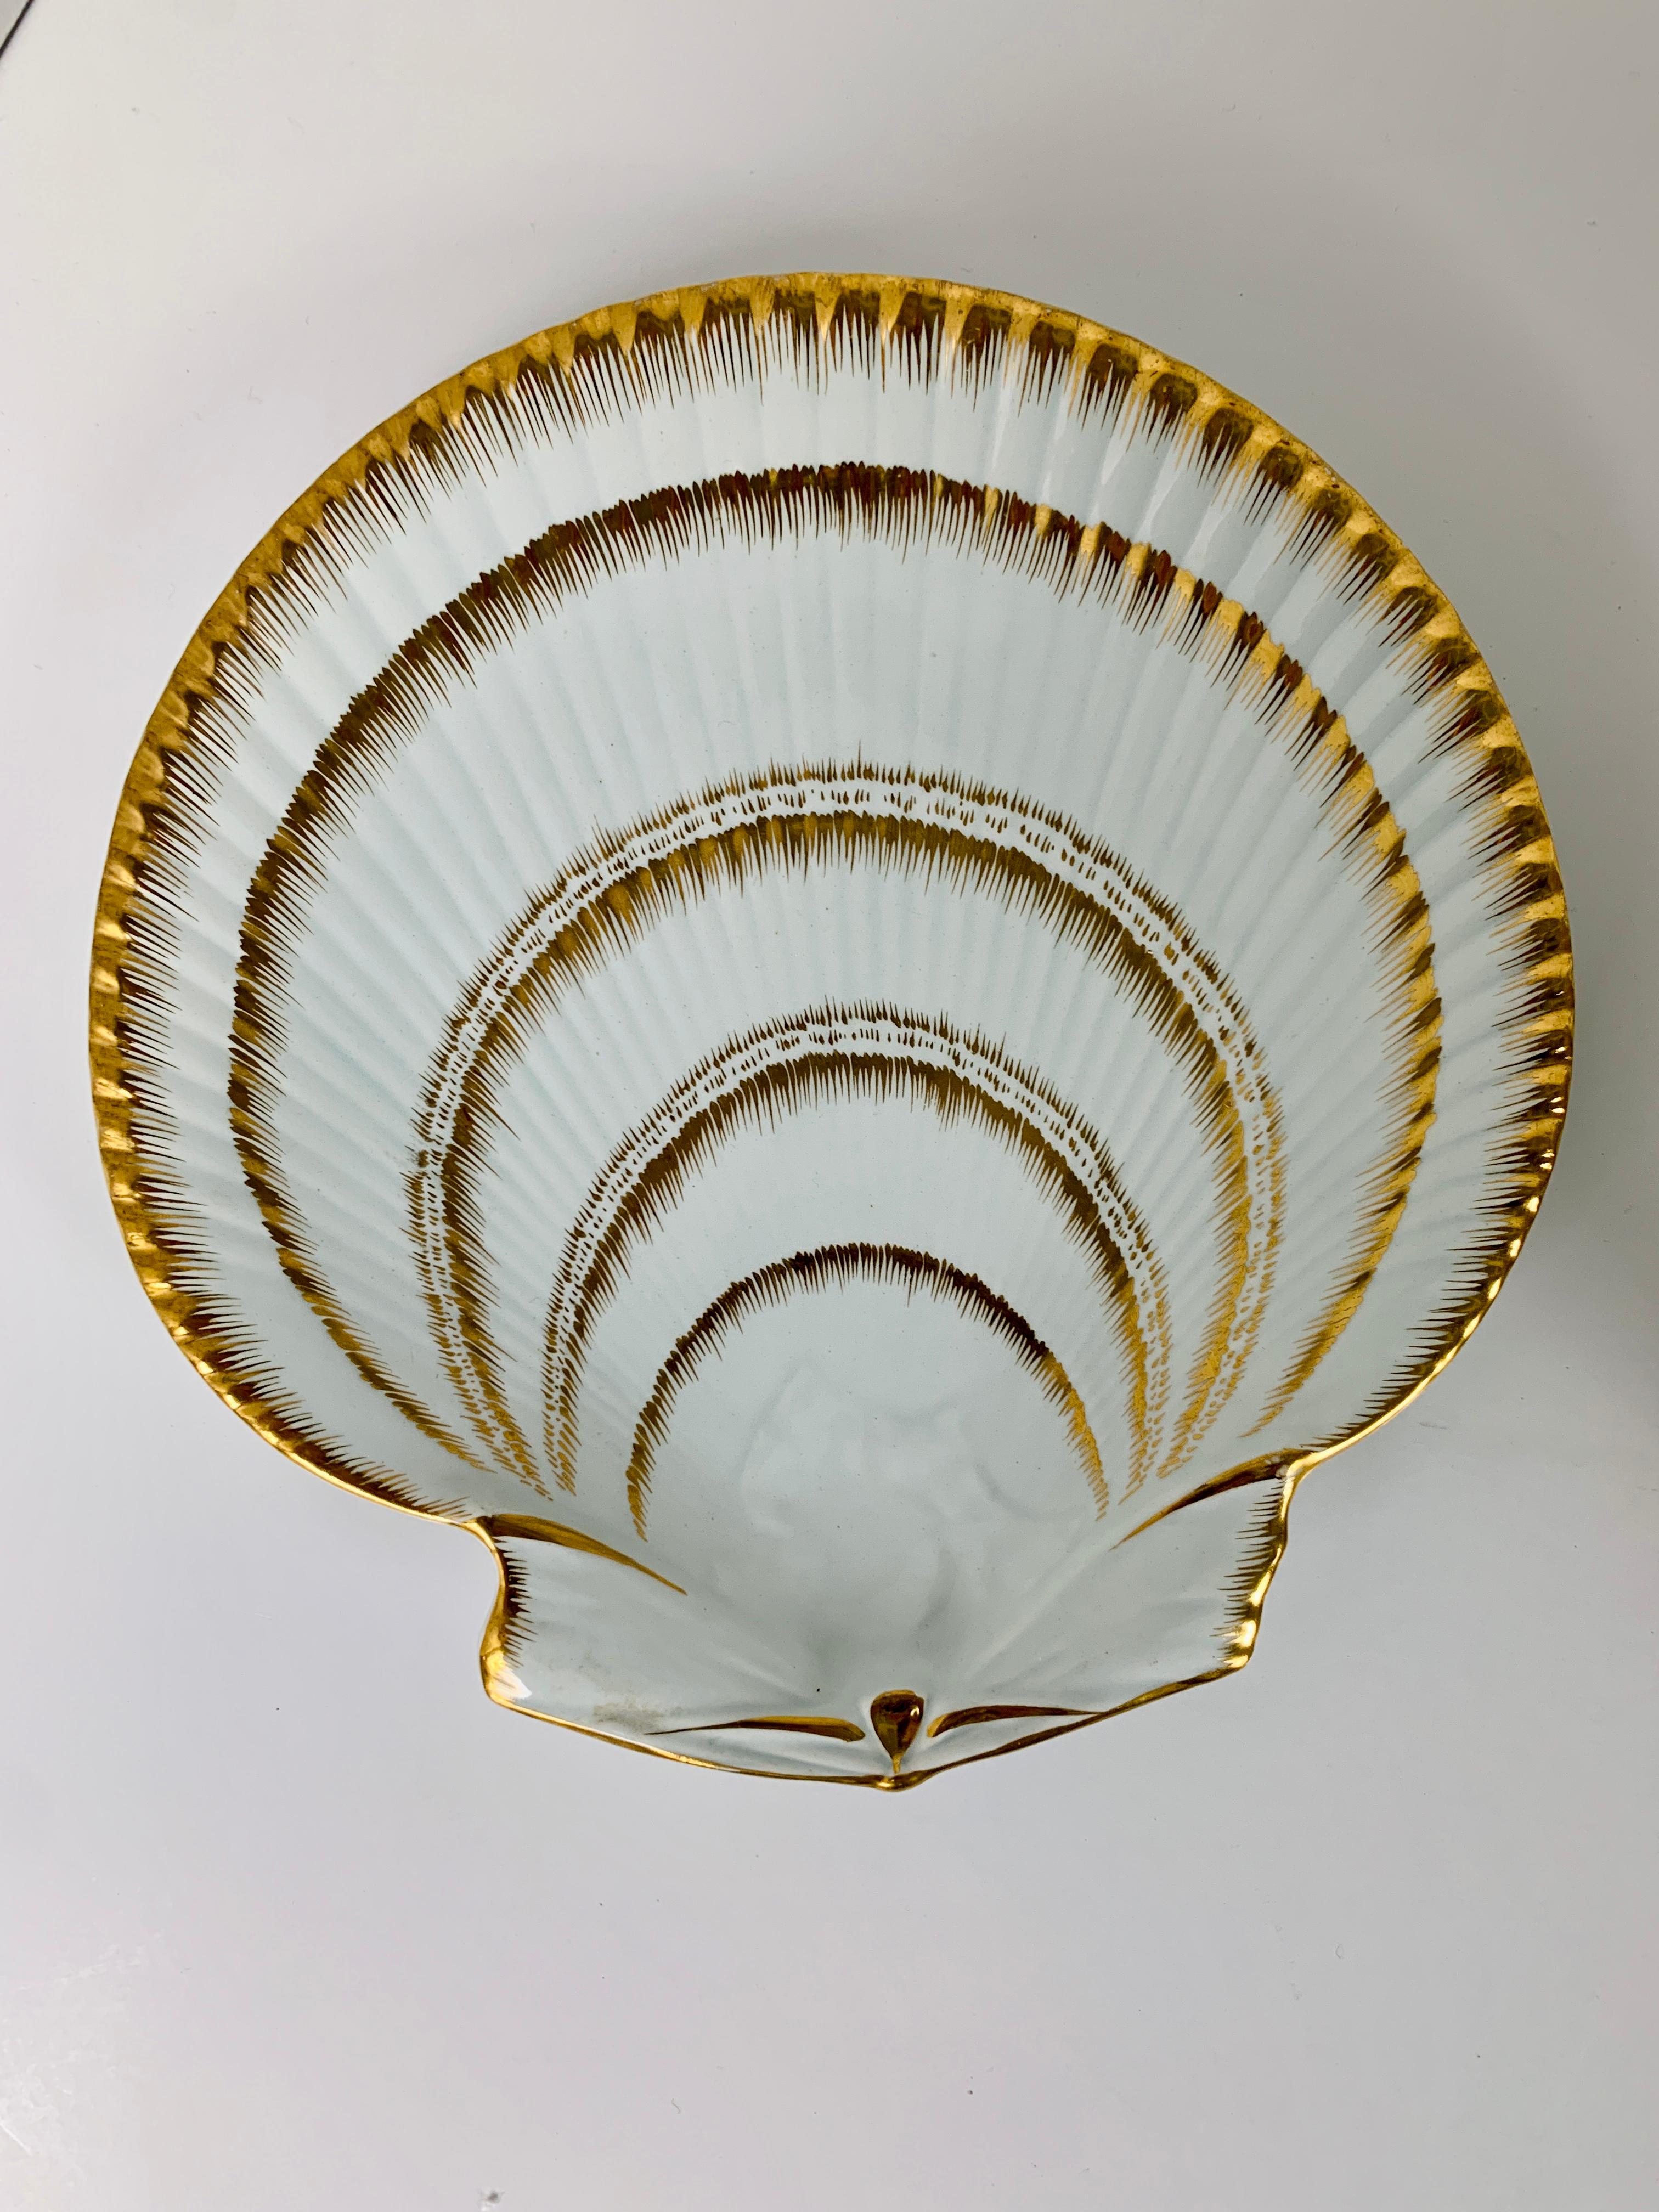 Regency Wedgwood Set with Scallop Shell Shaped Dishes, Clam Shaped Tureens & a Nautilus